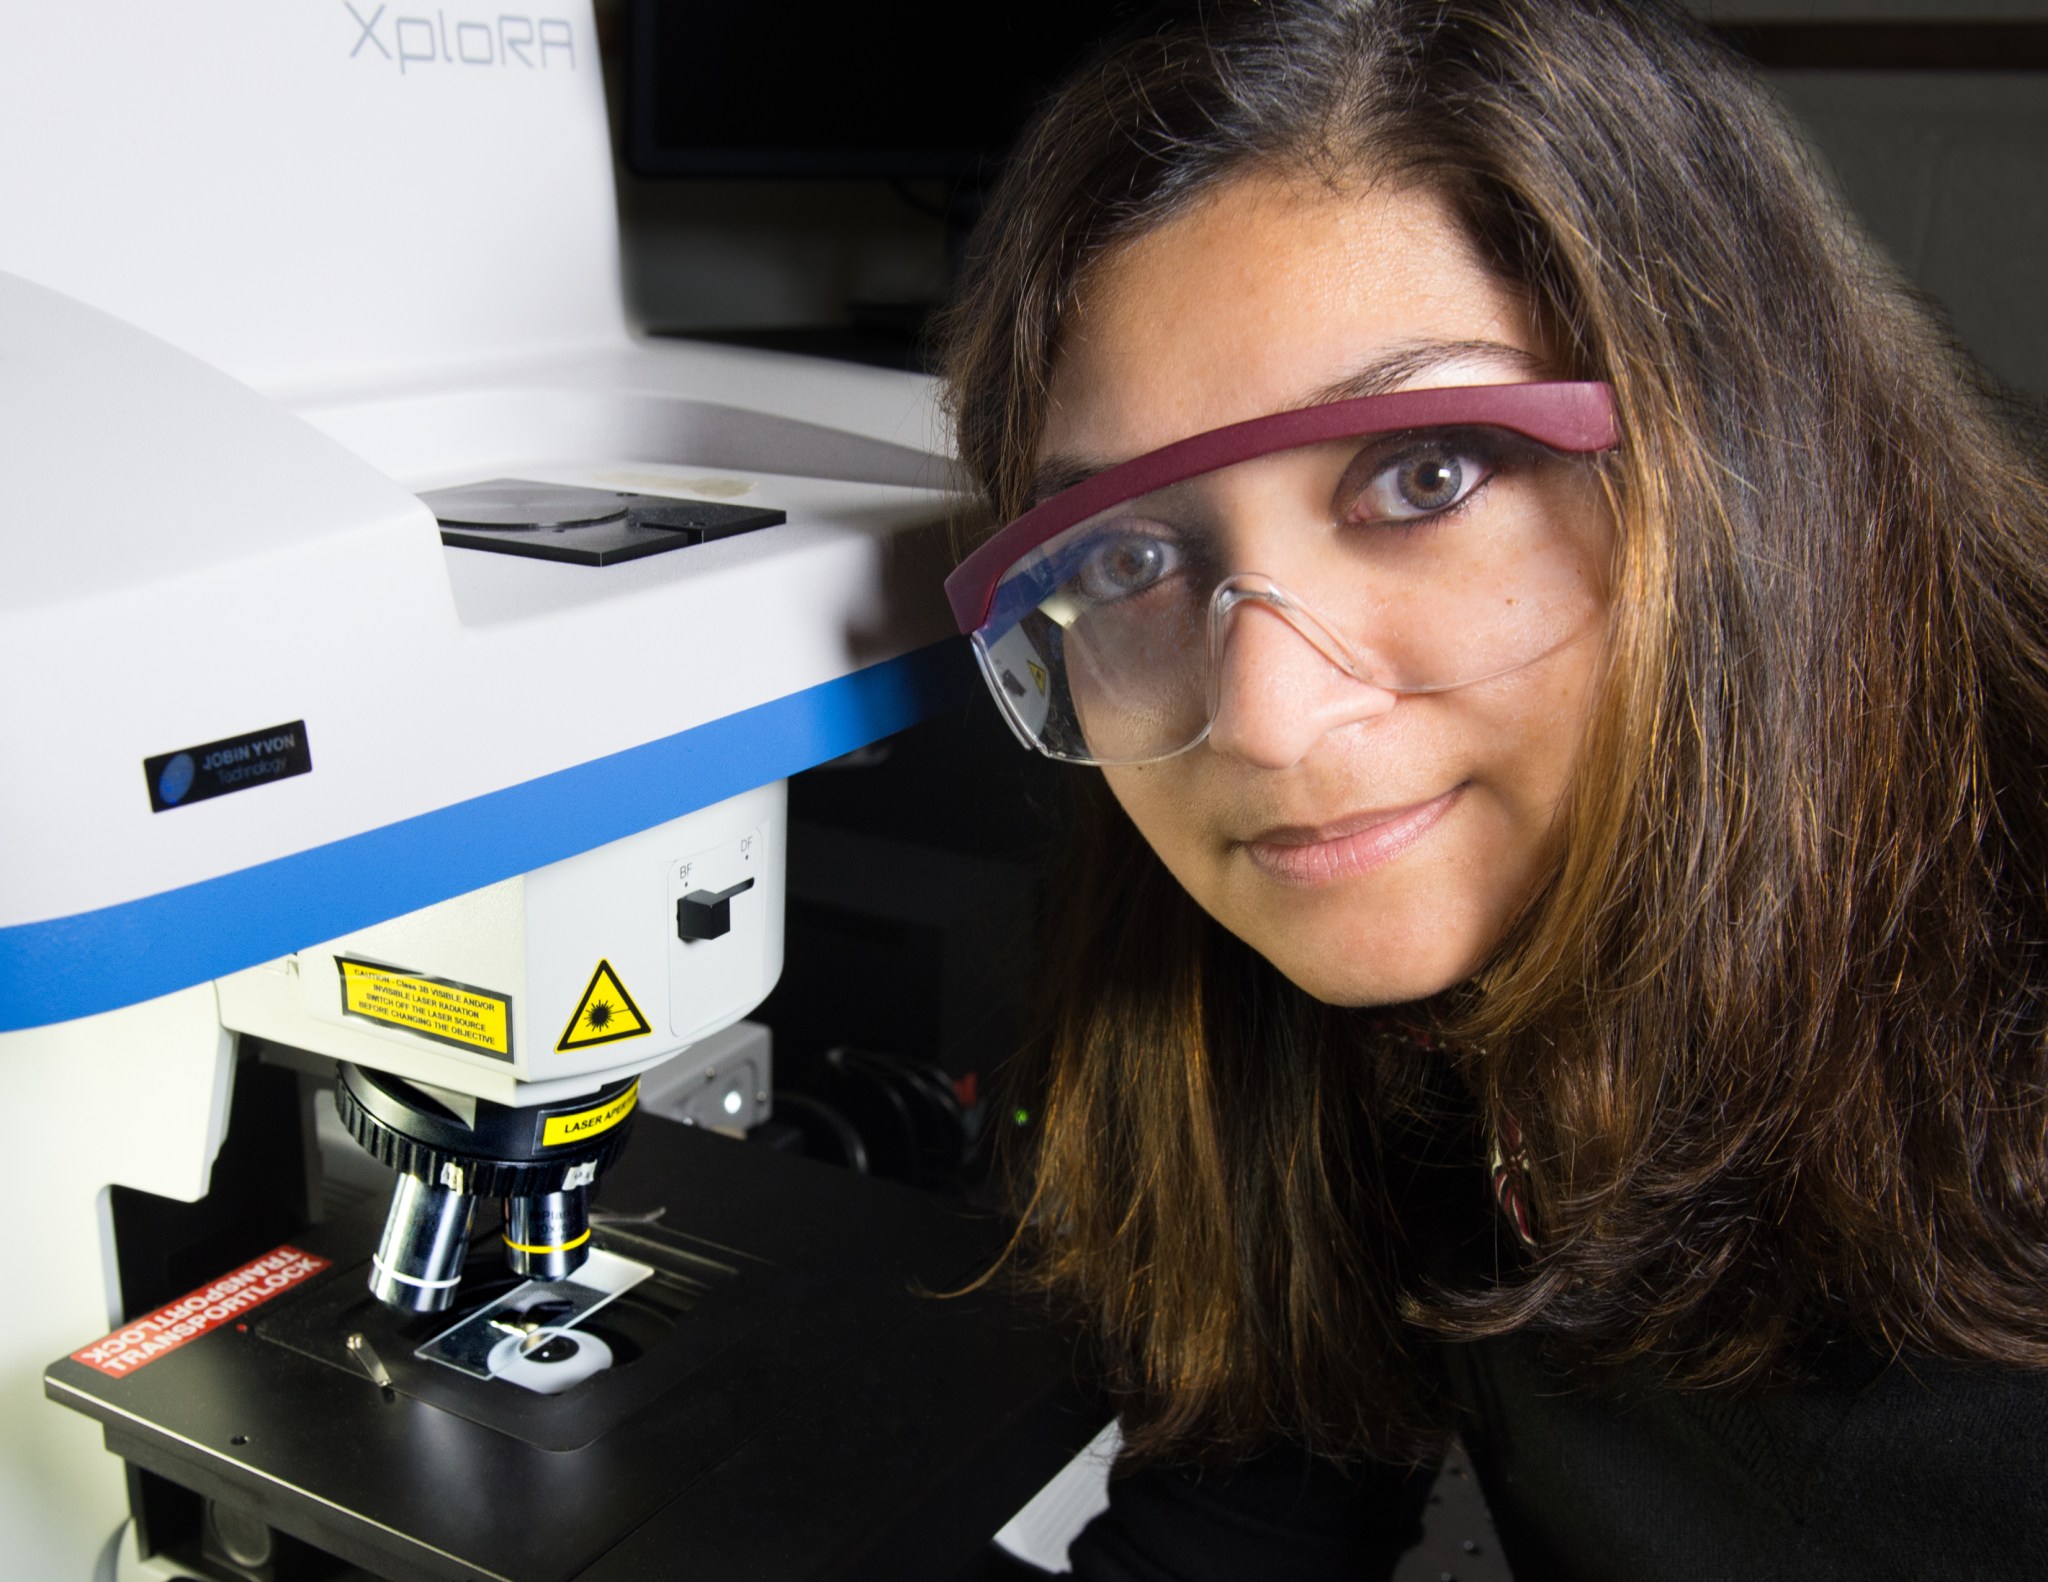 A woman with light brown skin and long dark brown hair wears burgundy-rimmed safety glasses, a black top and blue rubber gloves, leaning forward in front of a large microscope. The gray-white microscope takes up most of the left side of the image, with a blue stripe along its middle edge and the logo "XploRA" at the top. Underneath the lens in use is a slide resting on a platform, and a red label reading "Transport Lock" at the edge of the platform.